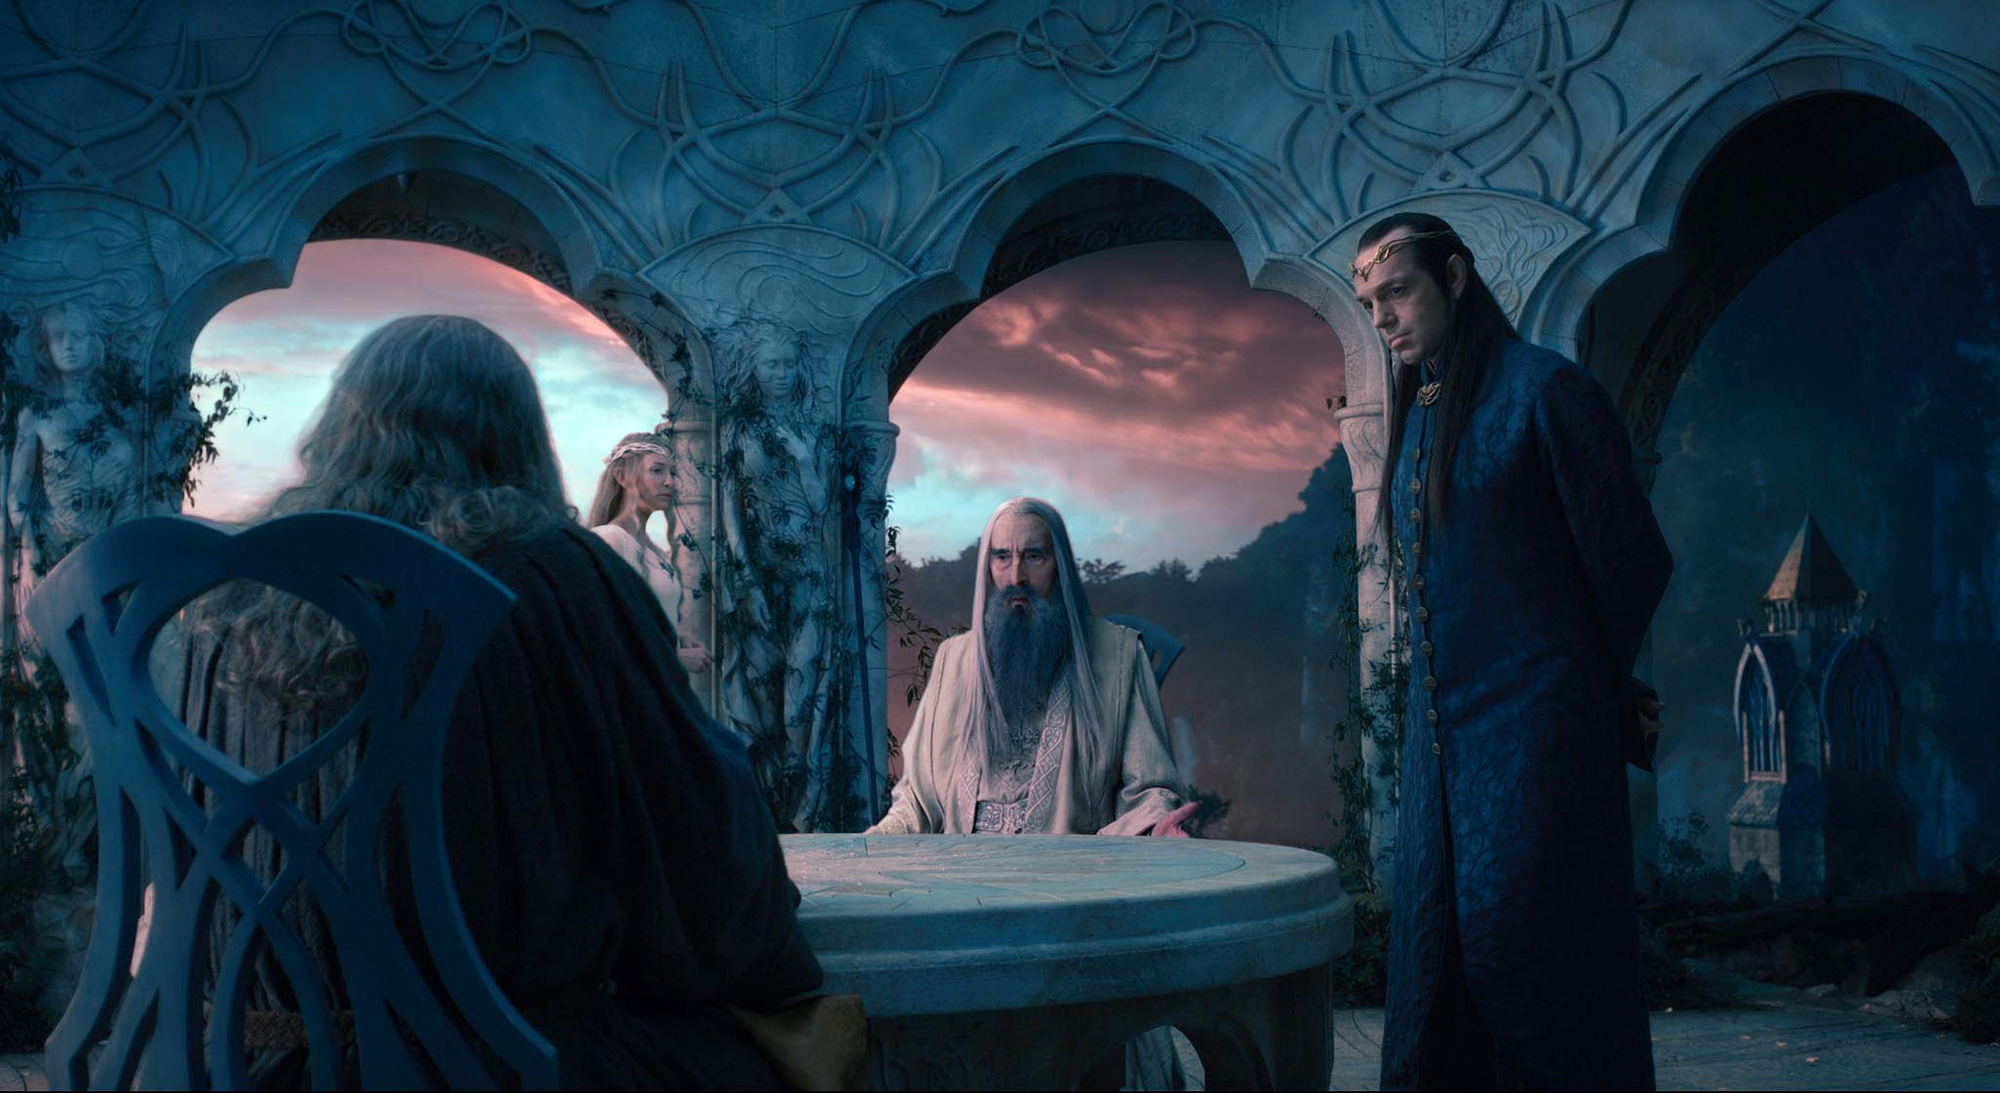 How to watch The Lord of the Rings and The Hobbit movies in order